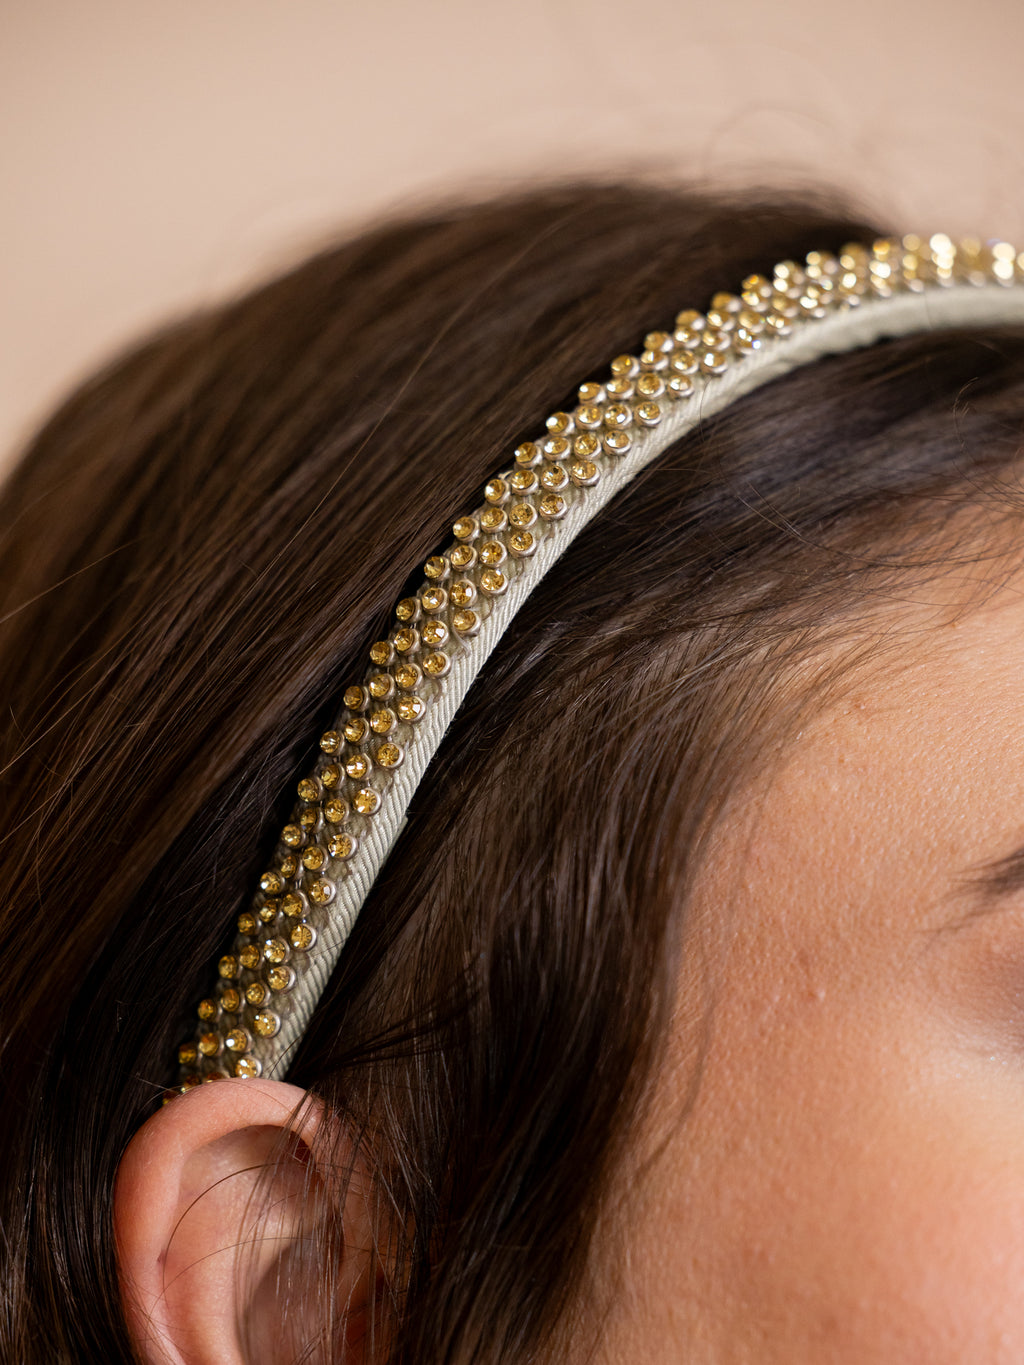 Woman wearing crystal studded headband against pink background